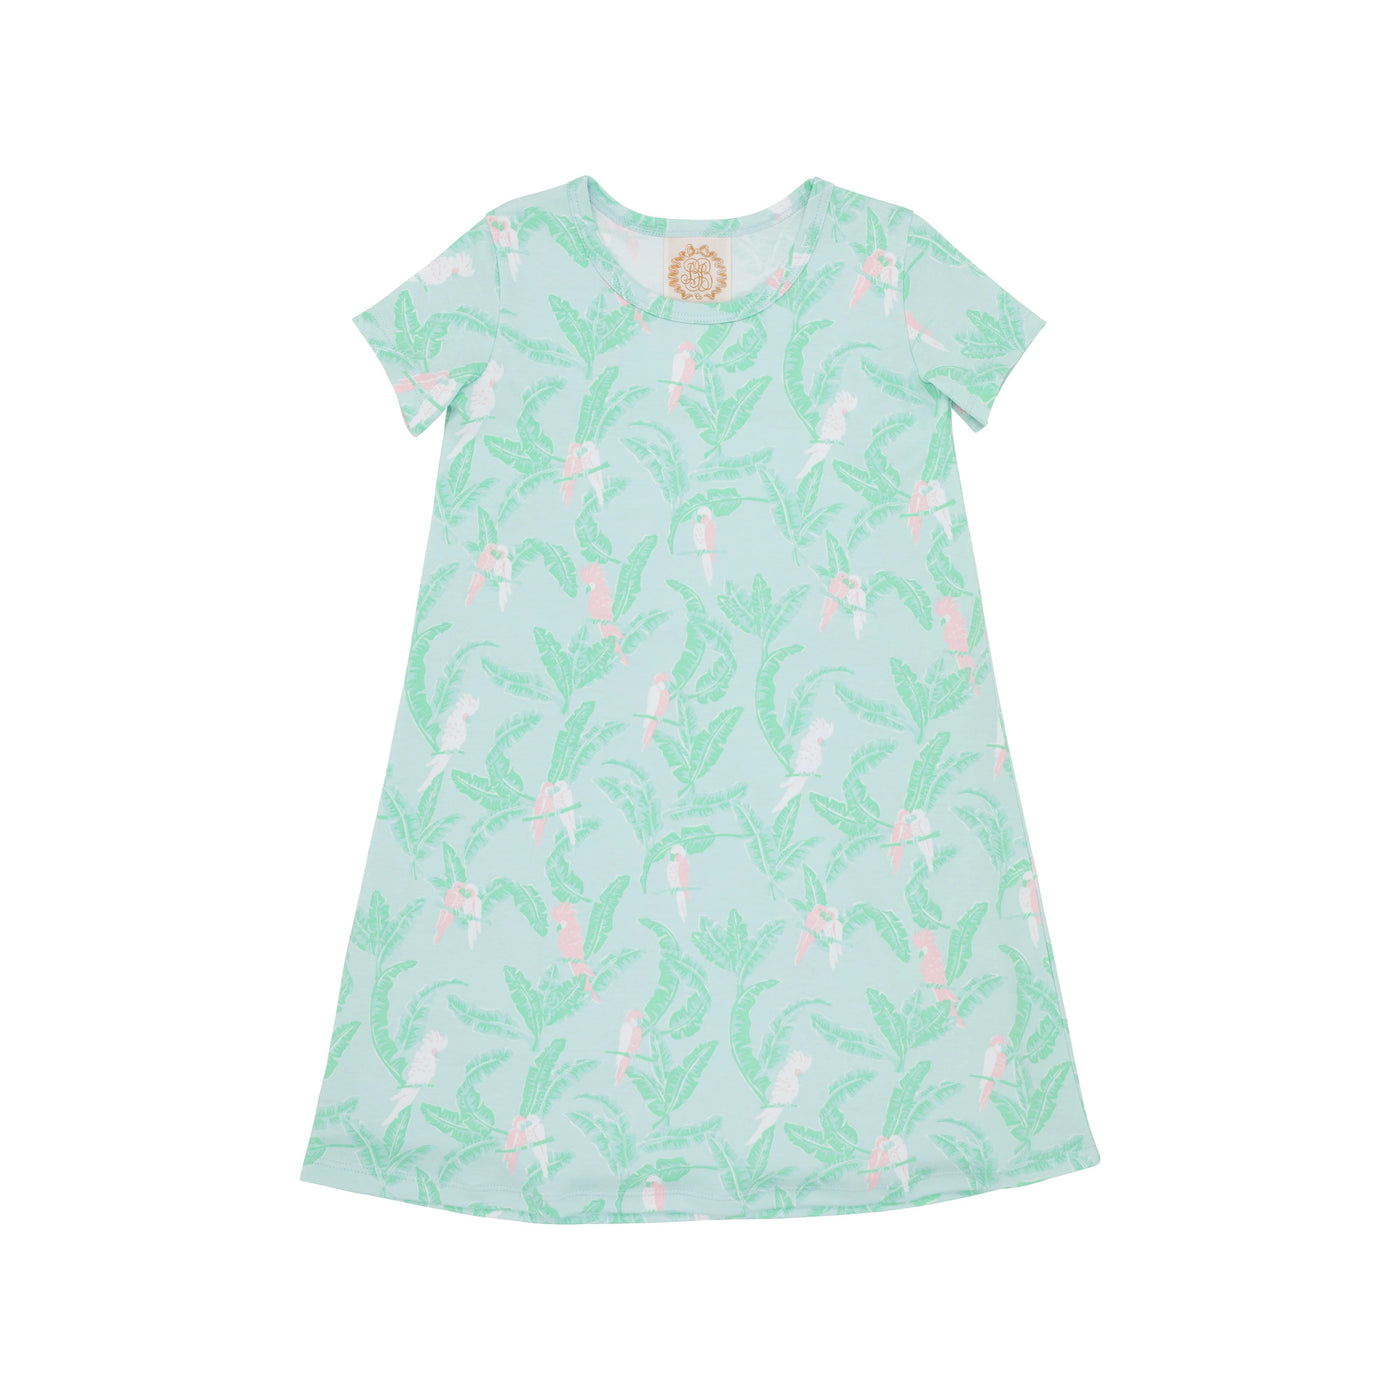 Polly Play Dress - Parrot Island Palms